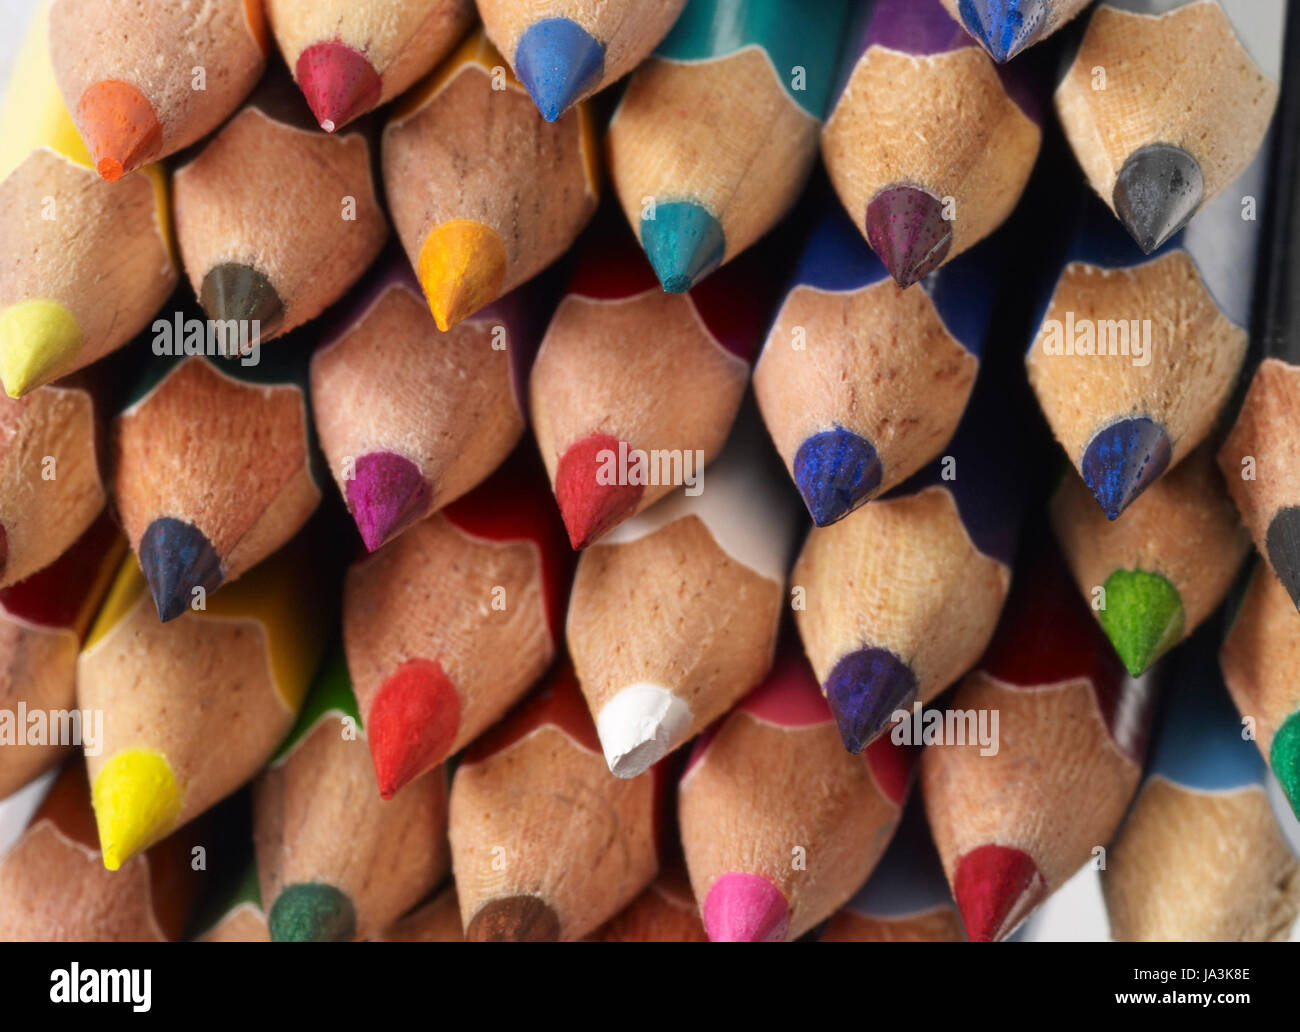 detail shot showing lots of multicolored pencil tips Stock Photo